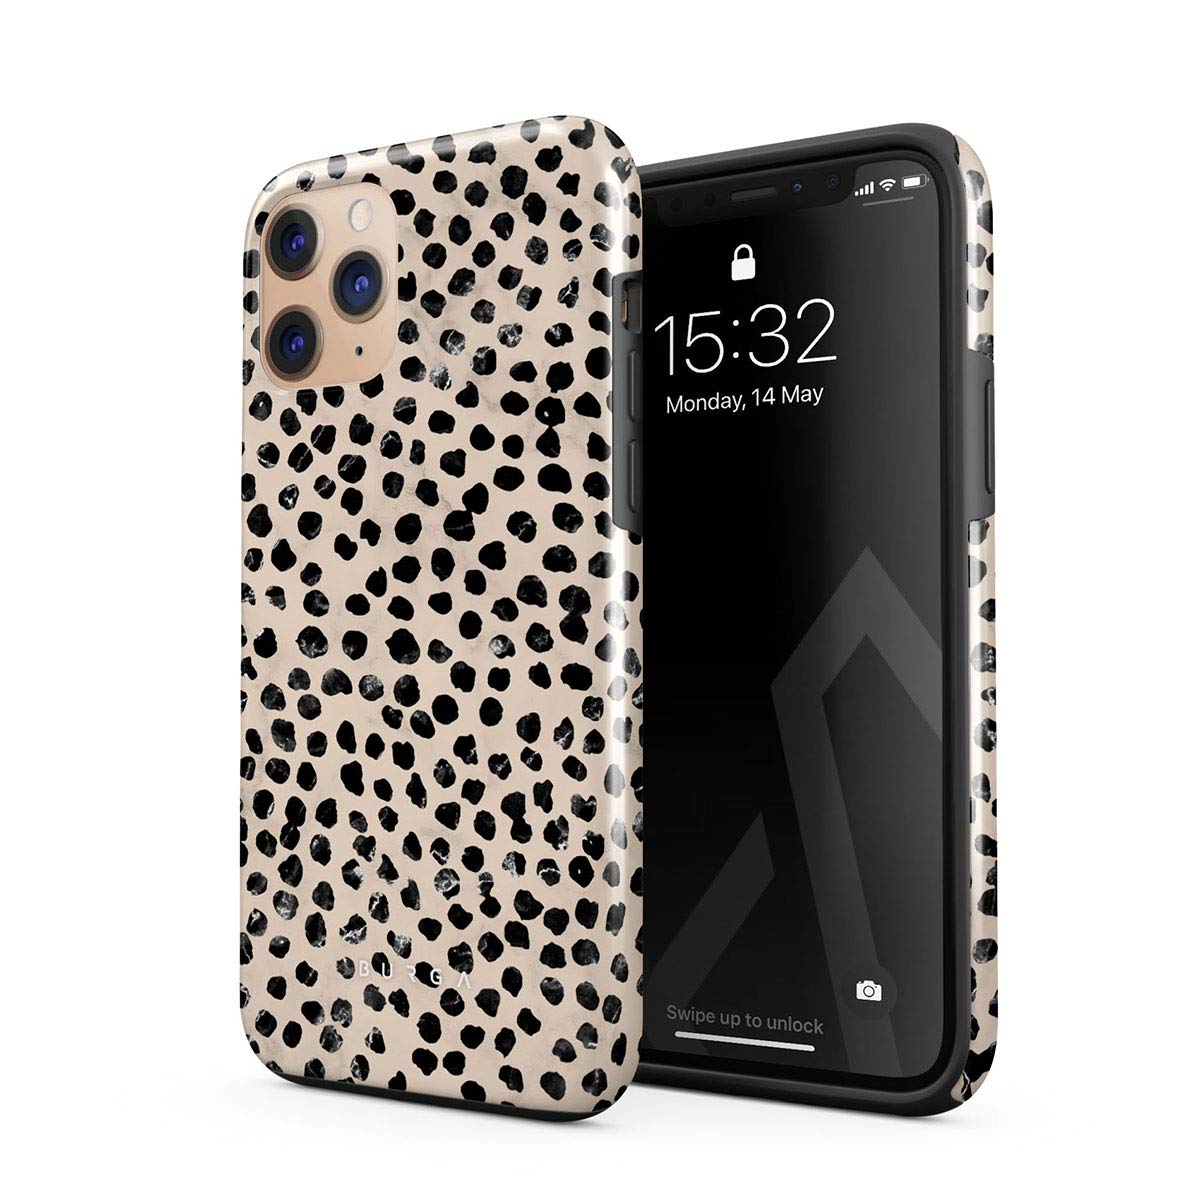 BURGA Phone Case Compatible with iPhone 11 PRO - Hybrid 2-Layer Hard Shell + Silicone Protective Case -Black Polka Dots Pattern Nude Almond Latte - Scratch-Resistant Shockproof Cover